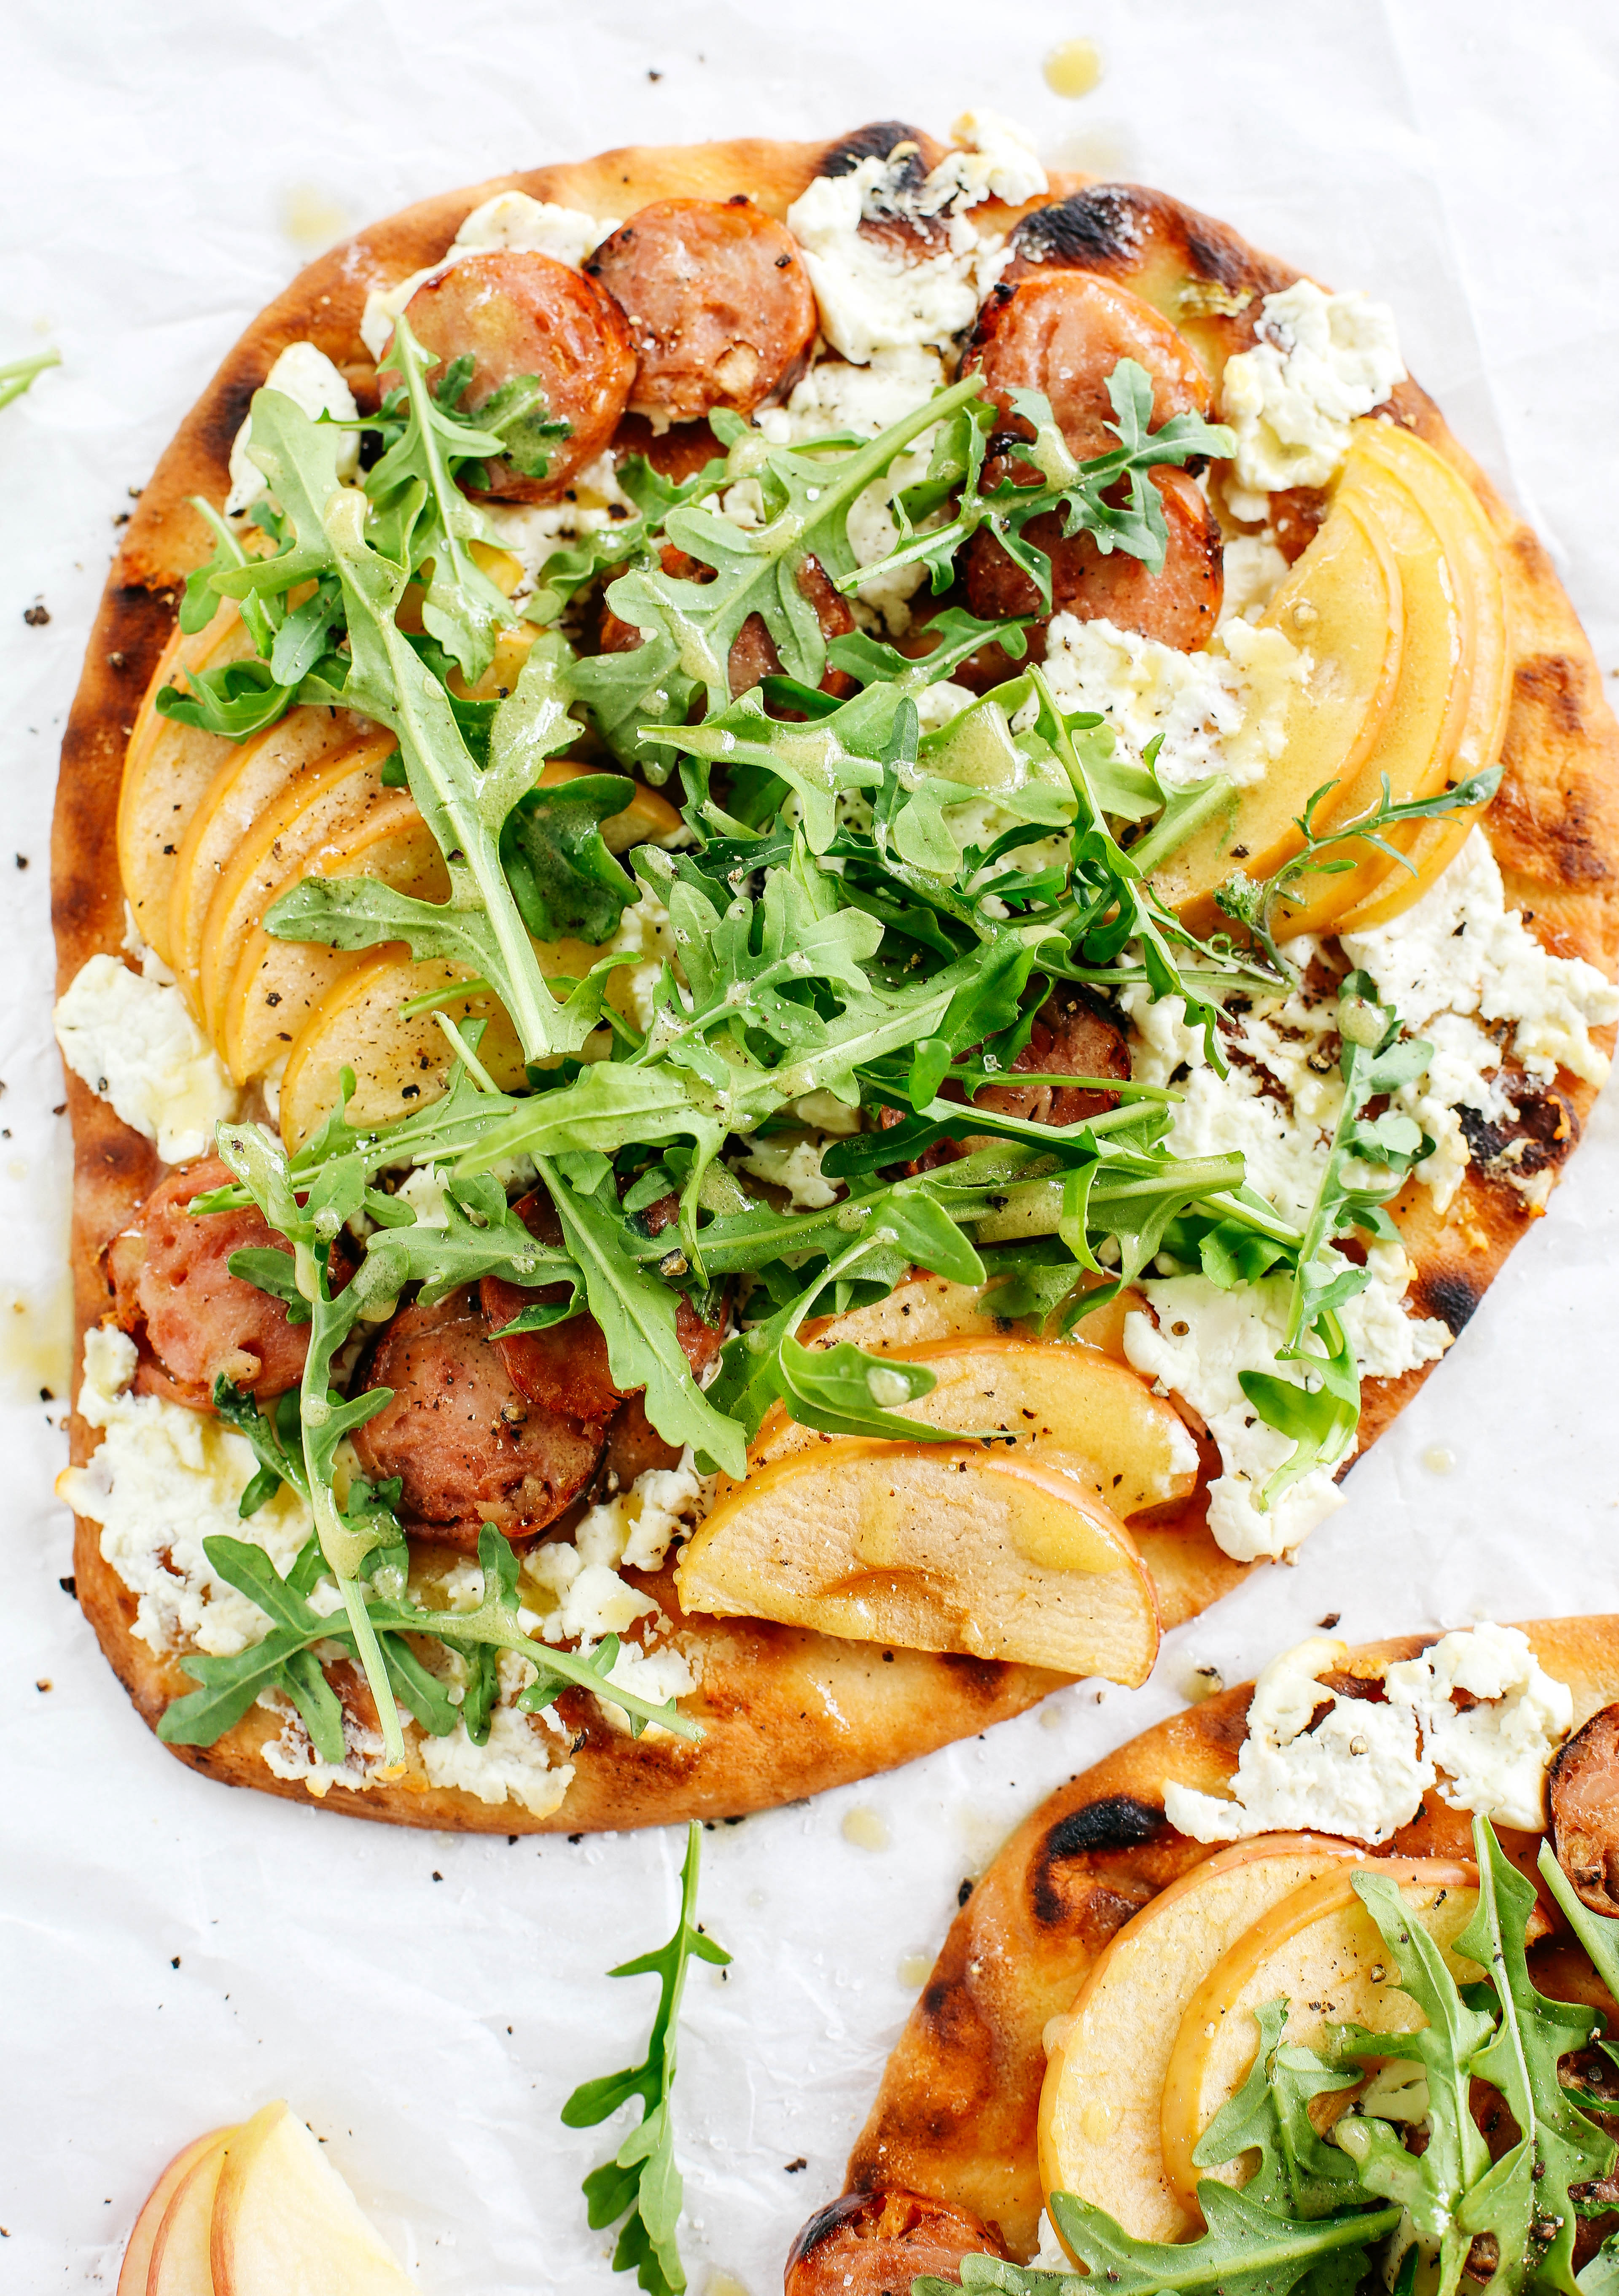 Kick off the summer with this Grilled Sausage & Apple Pizza with Goat Cheese that combines your favorite sweet and savory flavors into one delicious meal!